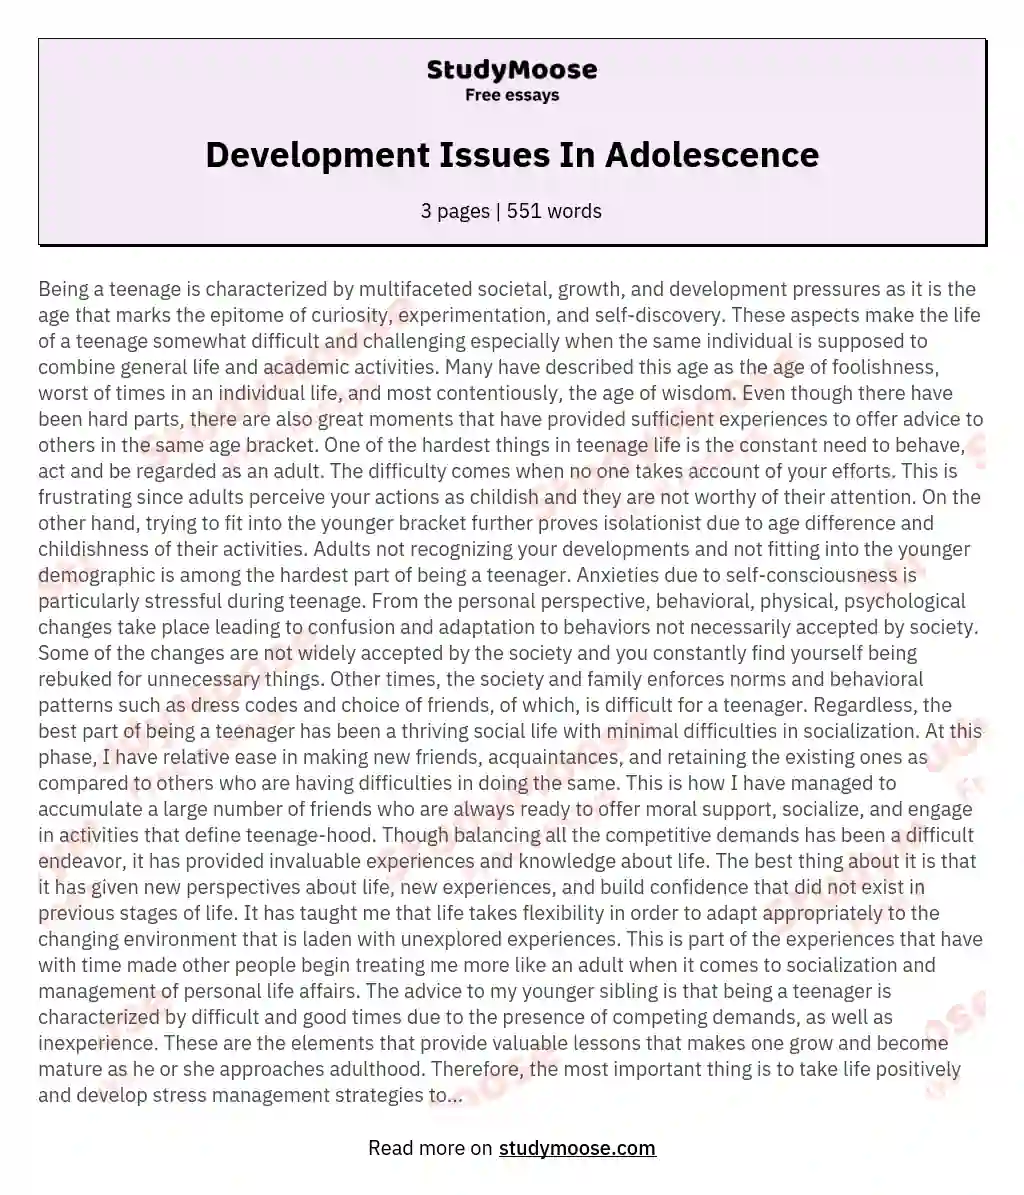 Development Issues In Adolescence essay